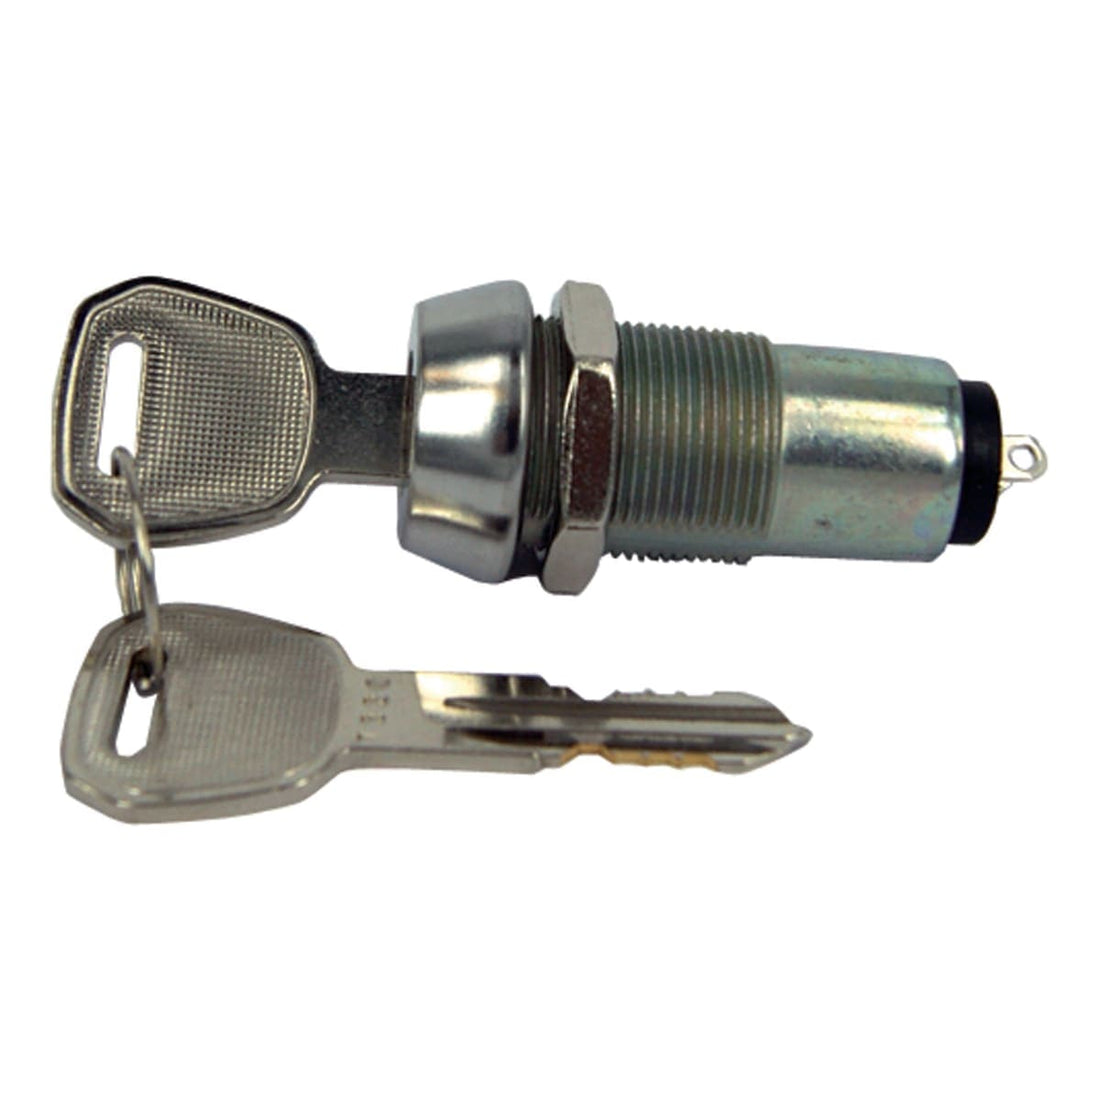 KEY SWITCH 2 POSITIONS OFF-ON - best price from Maltashopper.com BR420004460